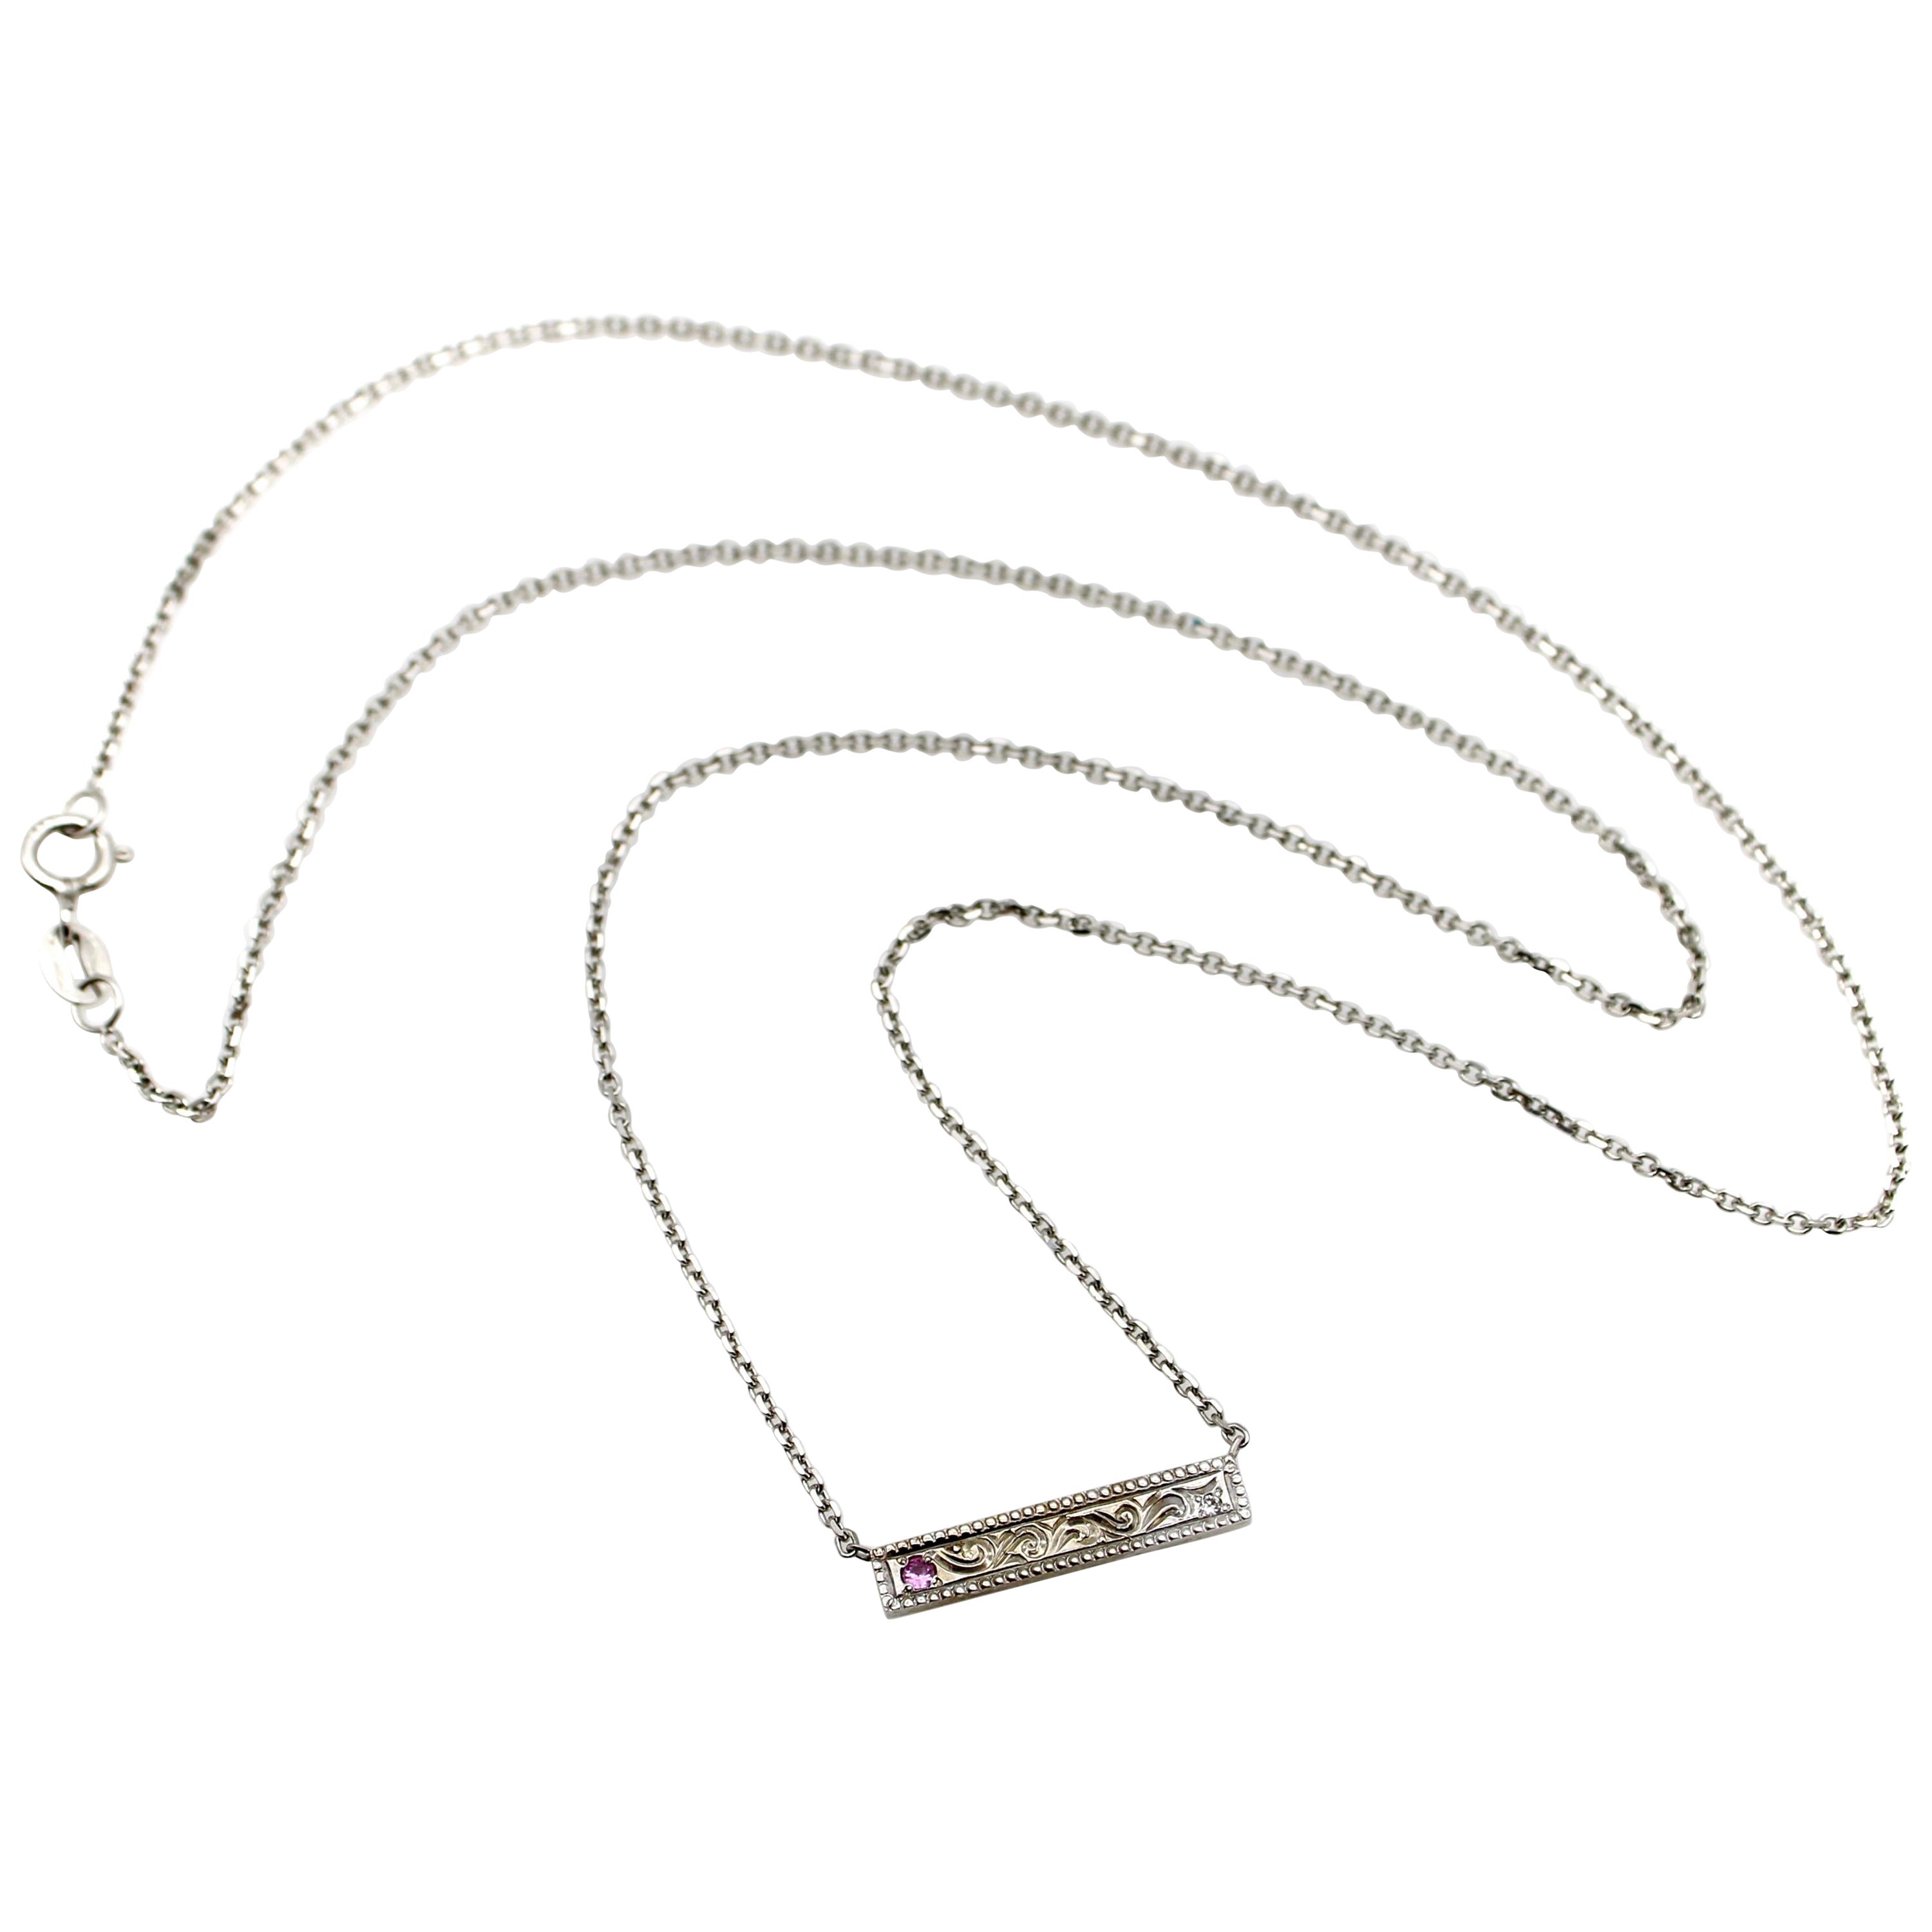 14K White Gold Bar Necklace with Diamond and Pink Tourmaline